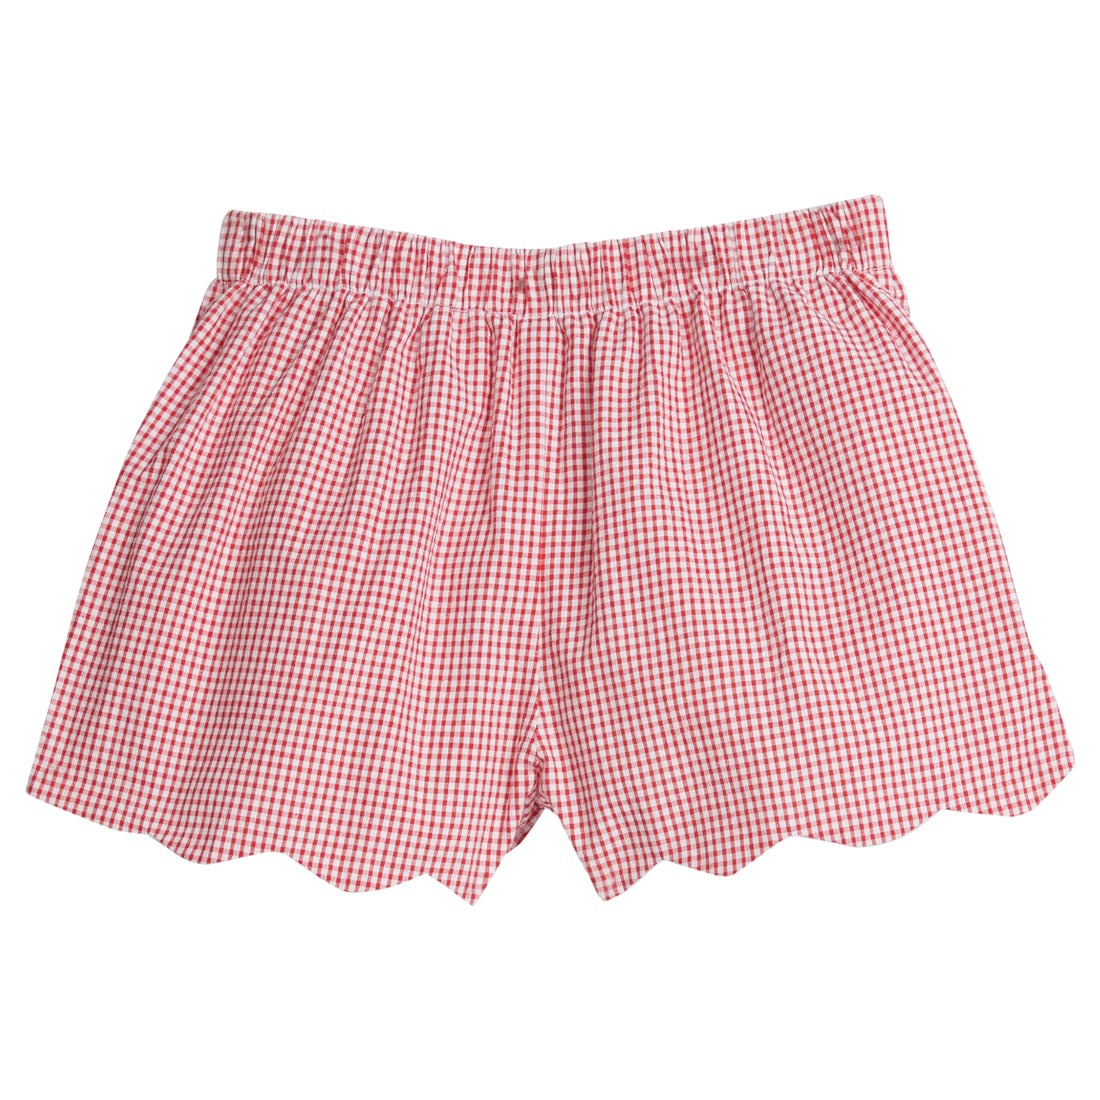 Little English Stars Smocked Tie Shoulder Tank w/ Red Gingham Scallop Shorts